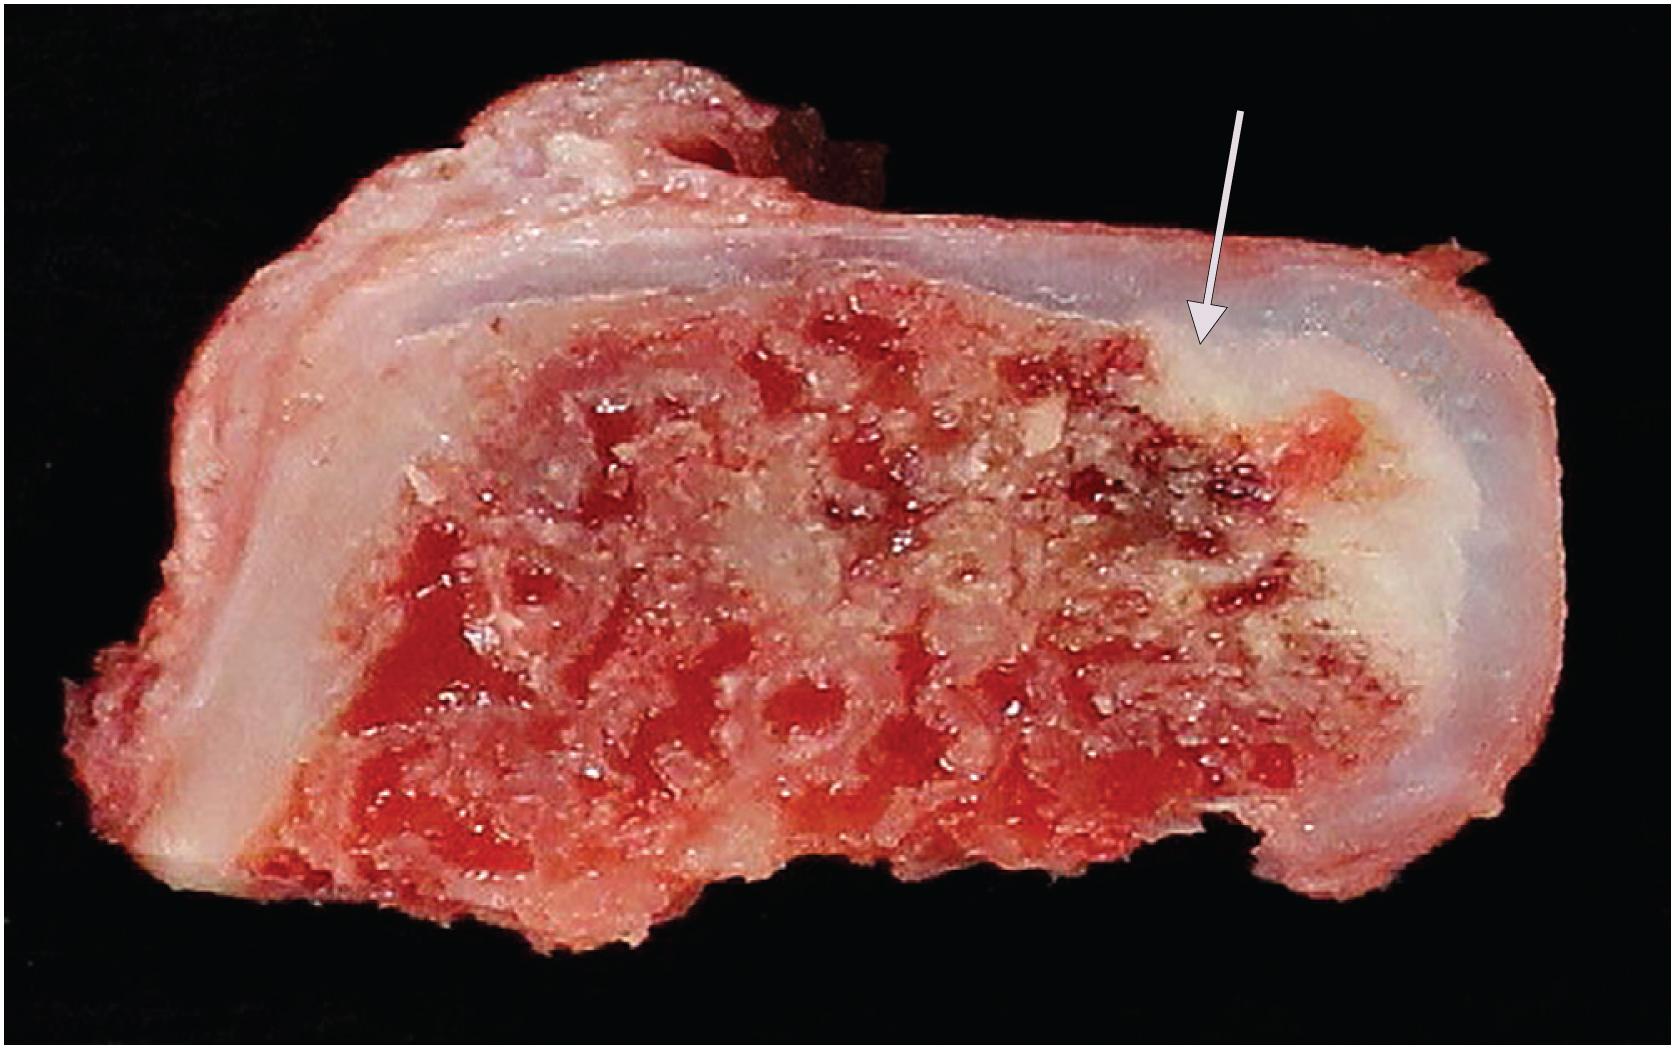 Fig. 17.12, This resected osteochondroma shows prominent bone deposition at the base of the cartilage cap (arrow). This mineralization is indicative of endochondral ossification and tumor growth cessation.